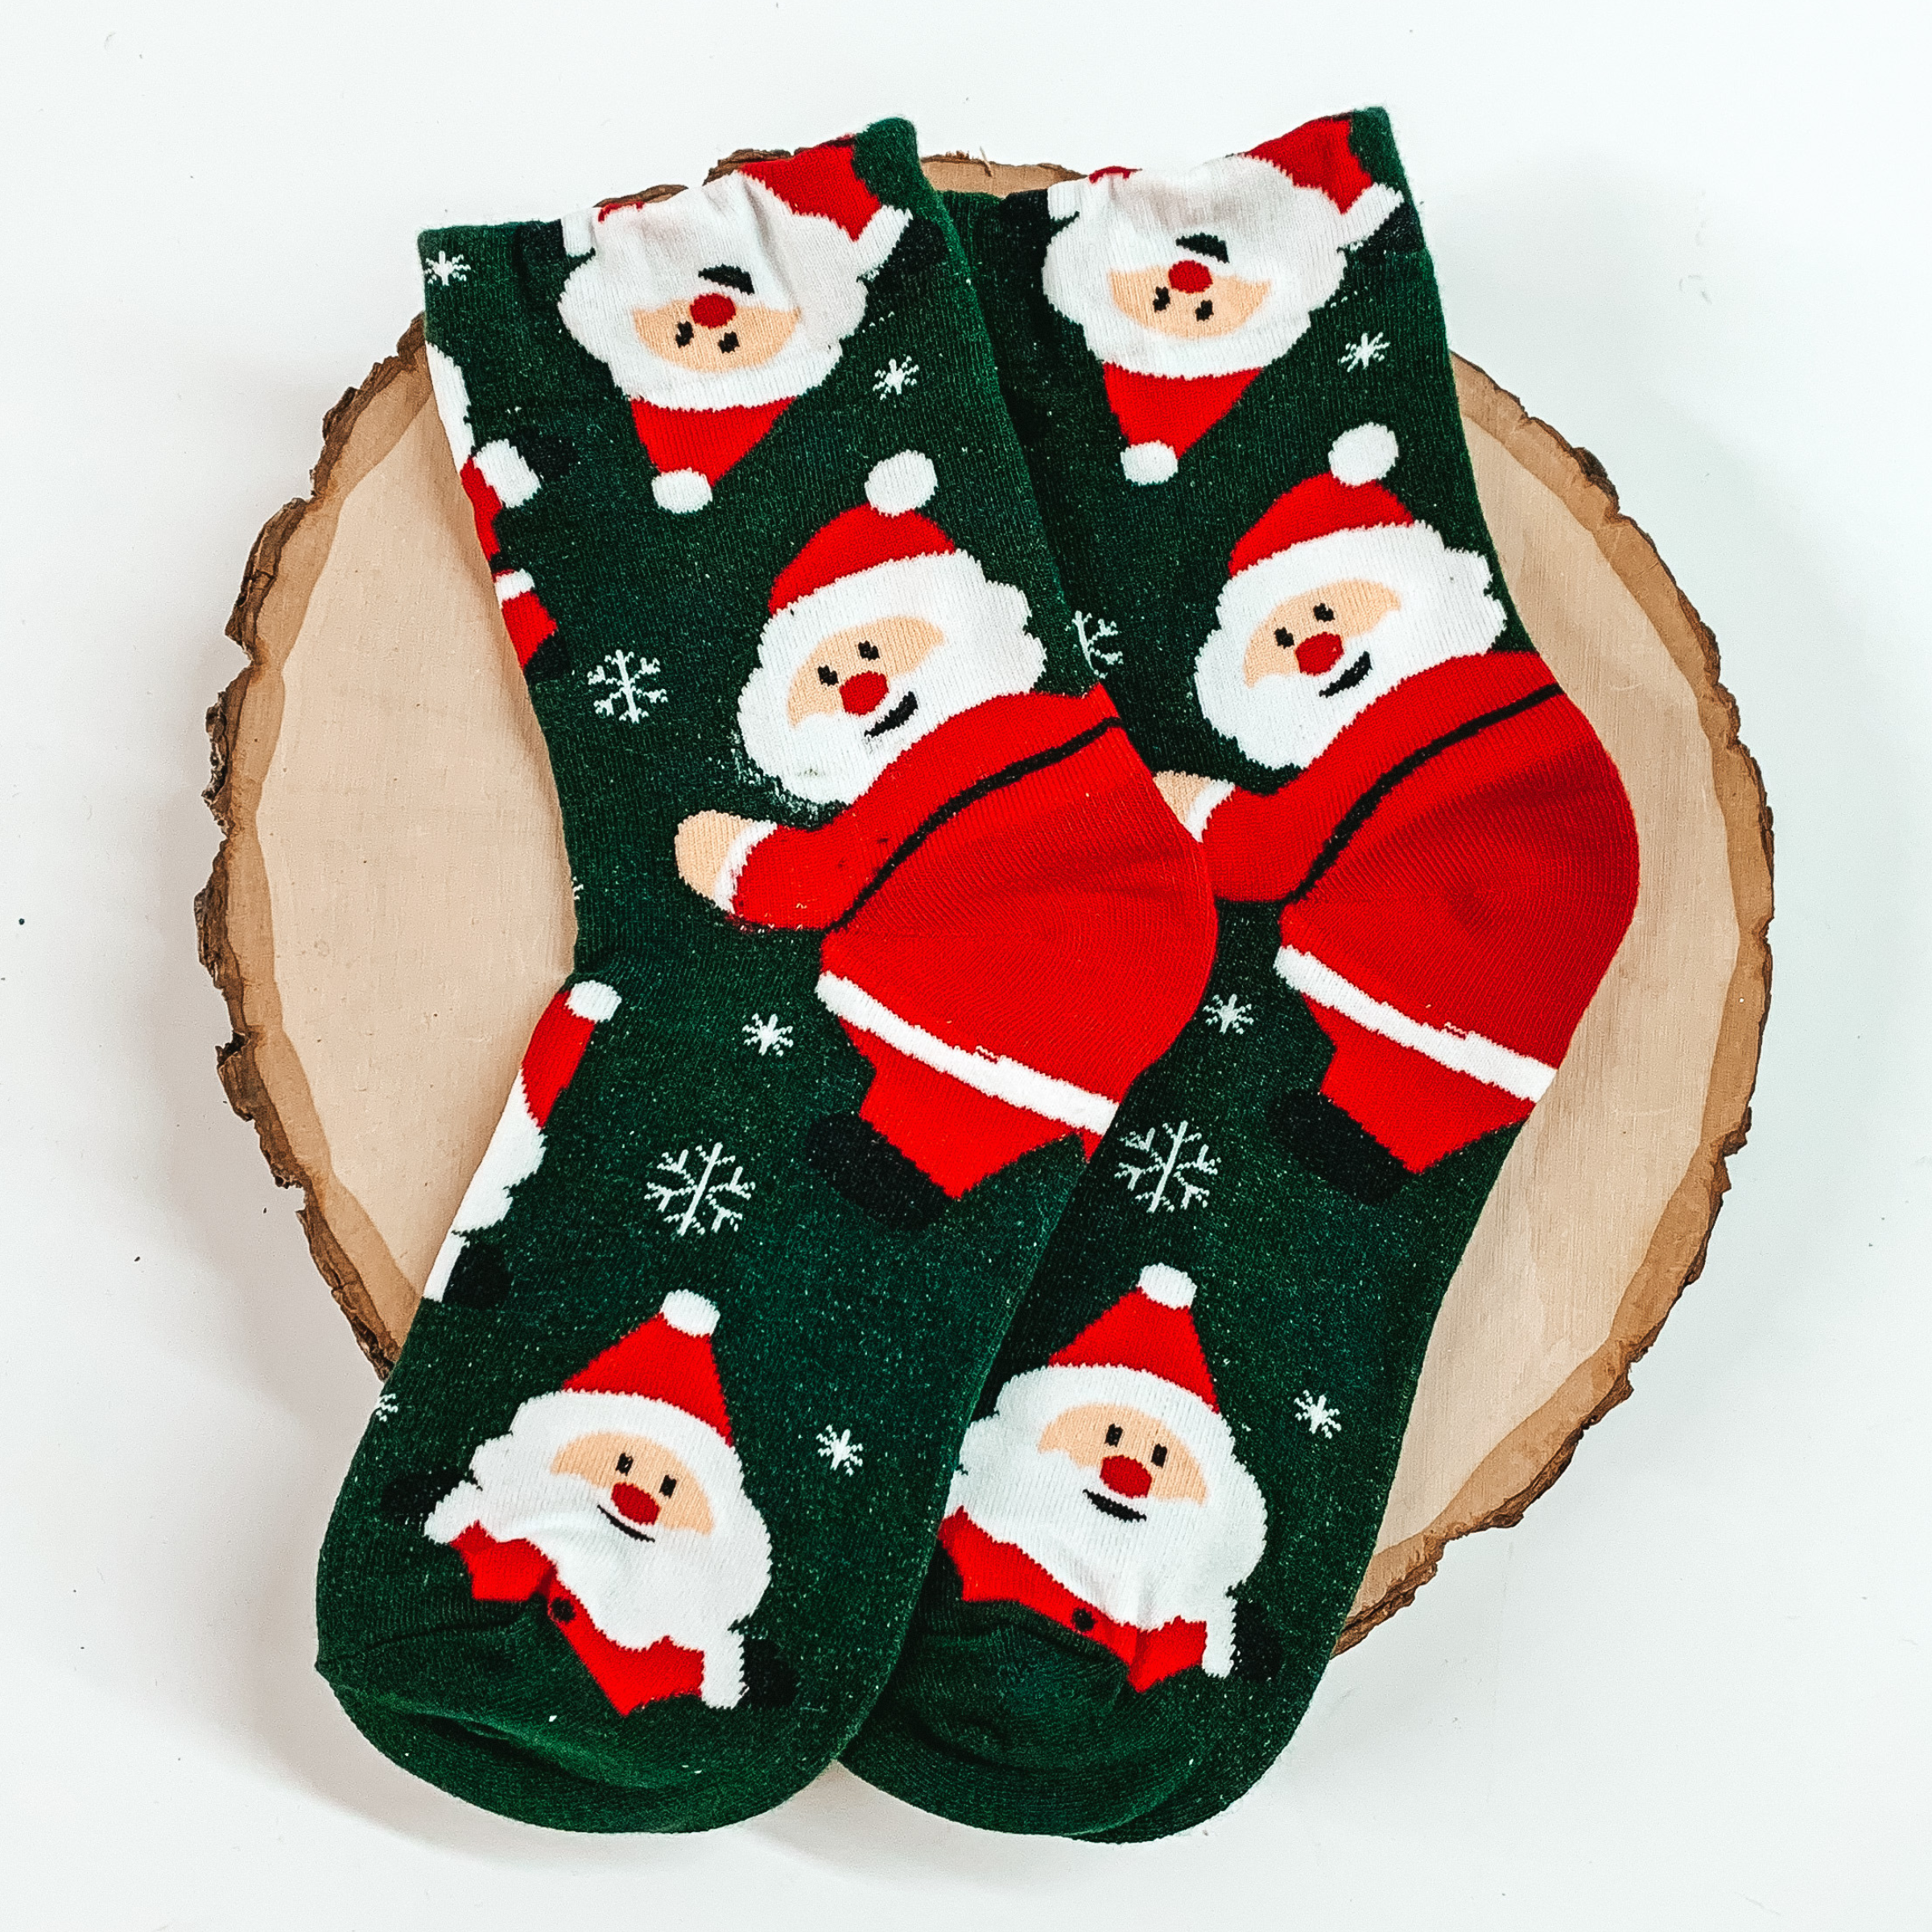 Green ankle socks with a santa claus and snowflake design. These socks are pictured on a piece of wood on a white background. 